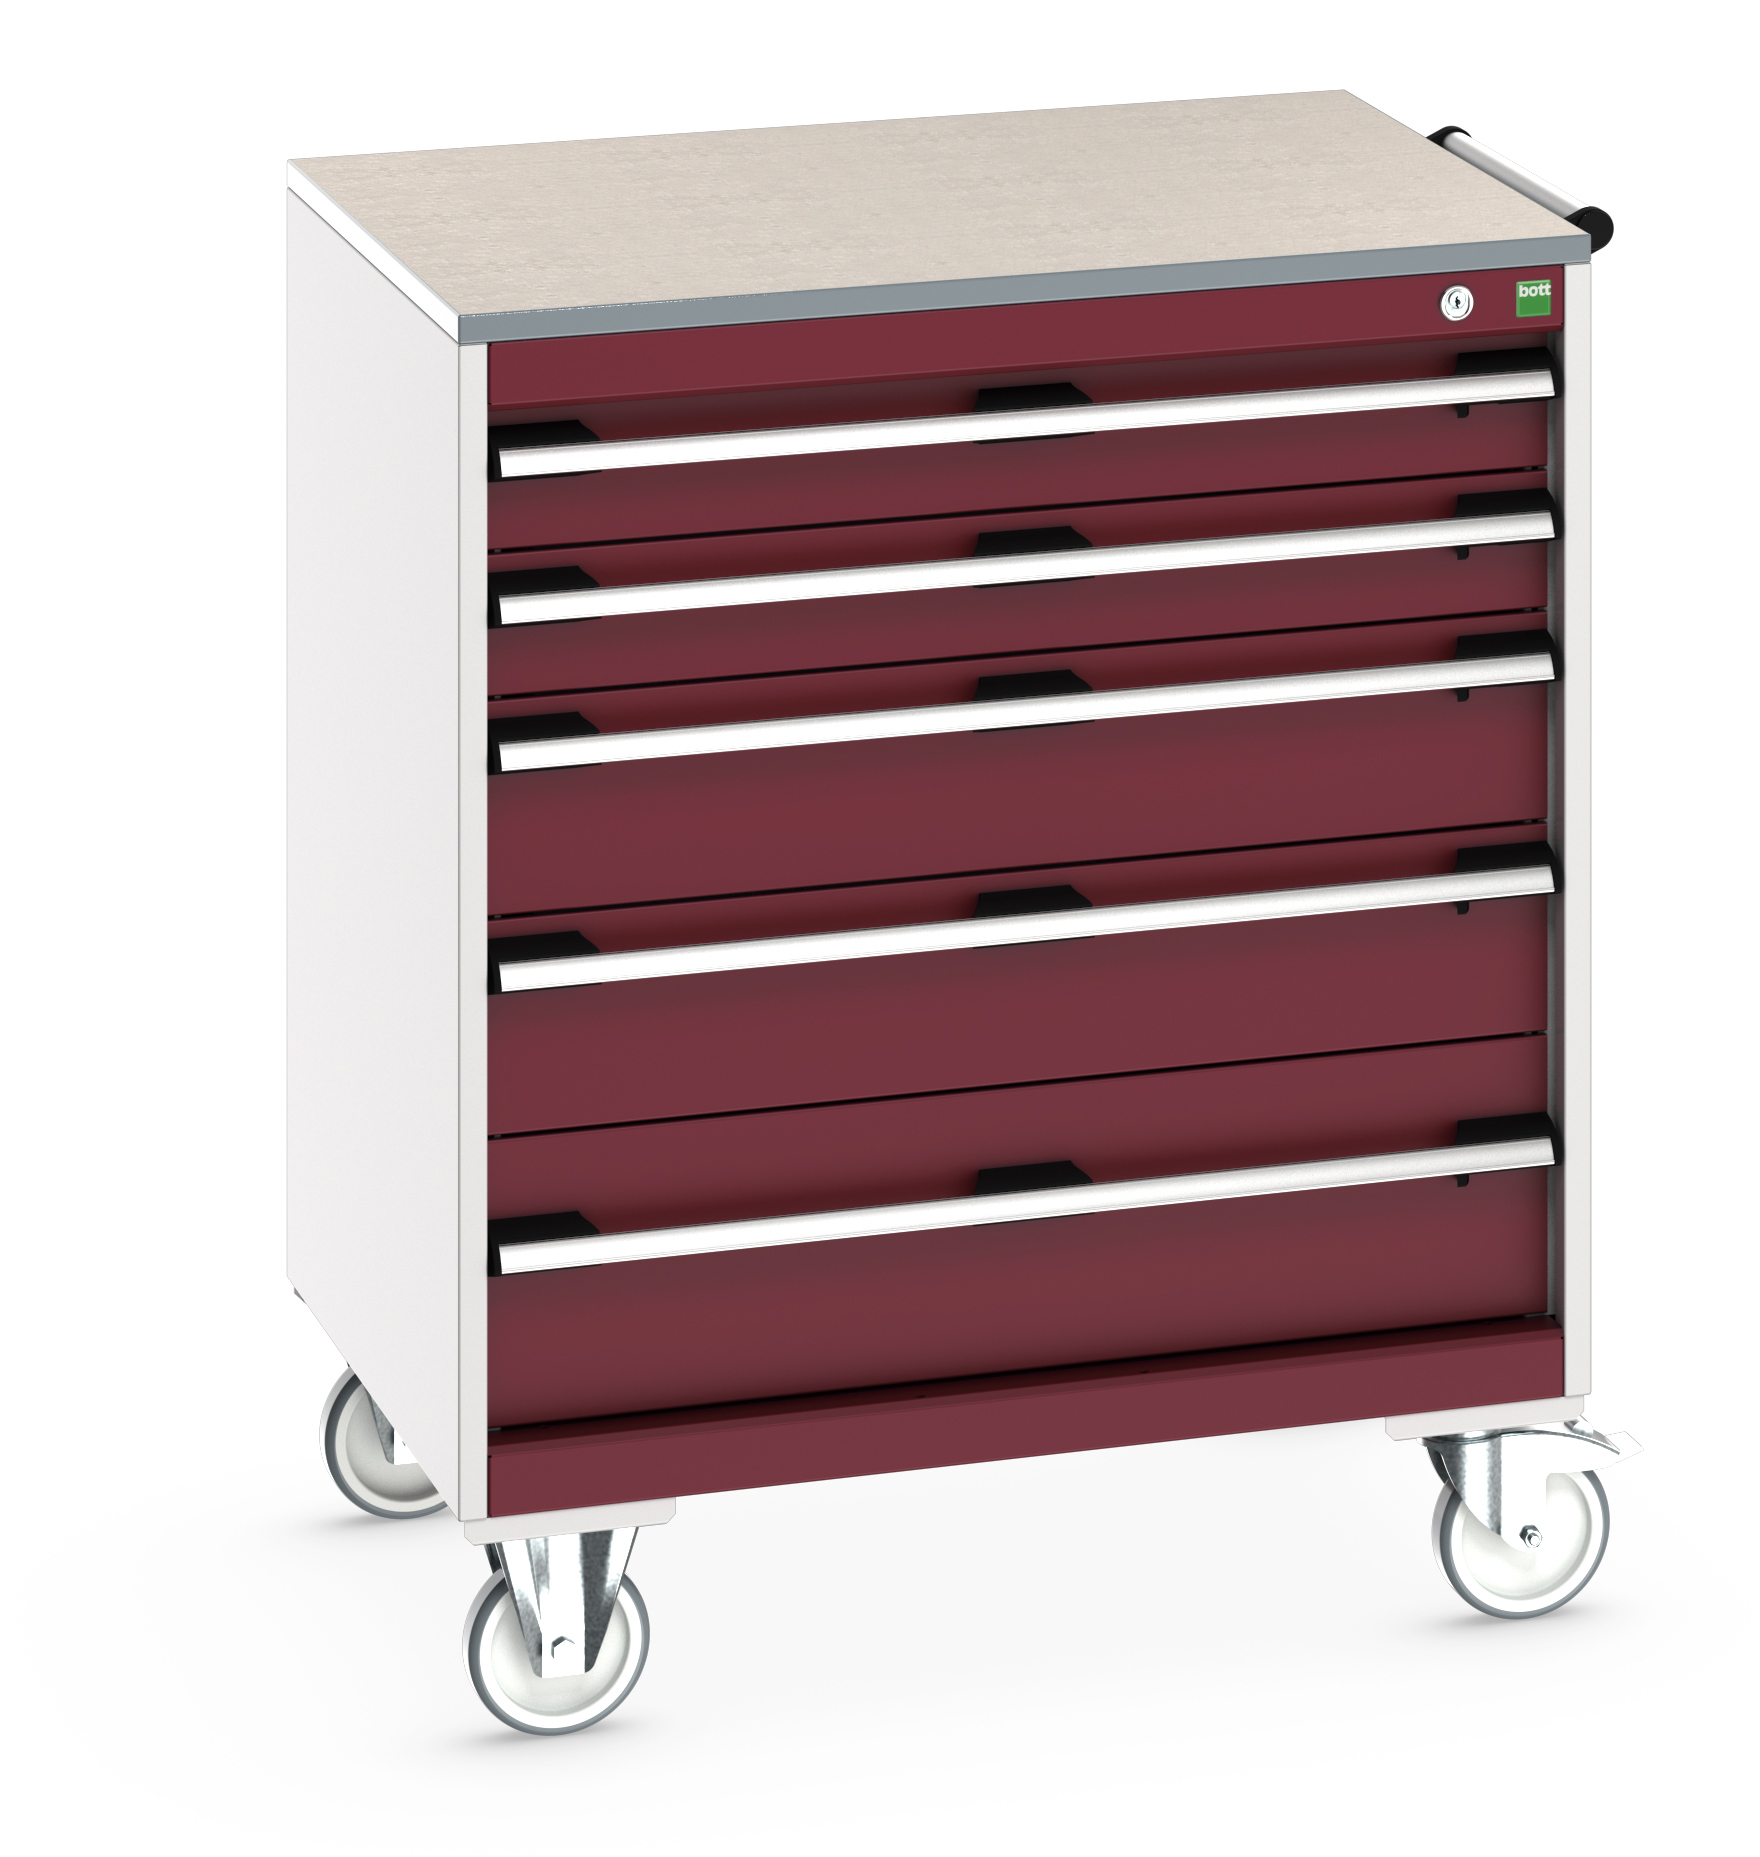 Bott Cubio Mobile Drawer Cabinet With 5 Drawers & Lino Worktop - 40402158.24V